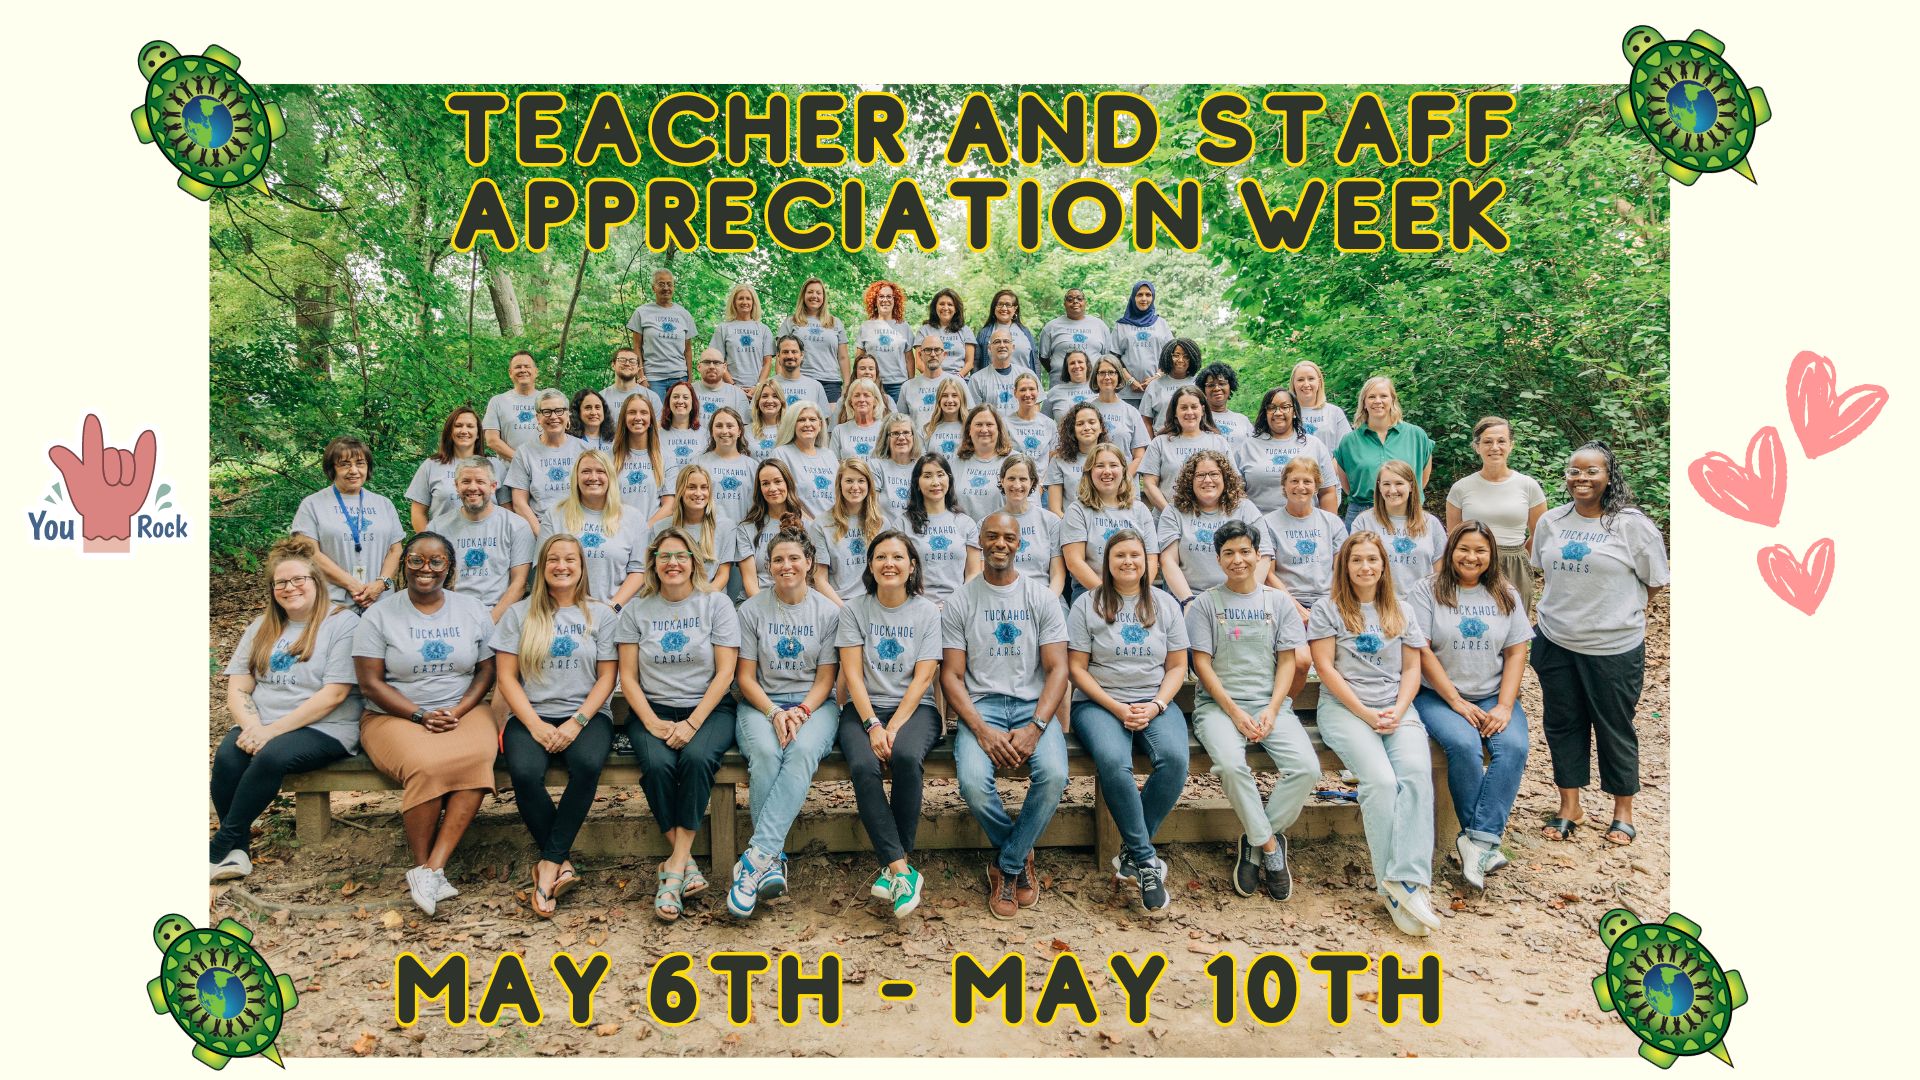 Group picture of Tuckahoe Staff outside with the words "Teacher and Staff Appreciation Week May 6th - May 10th"